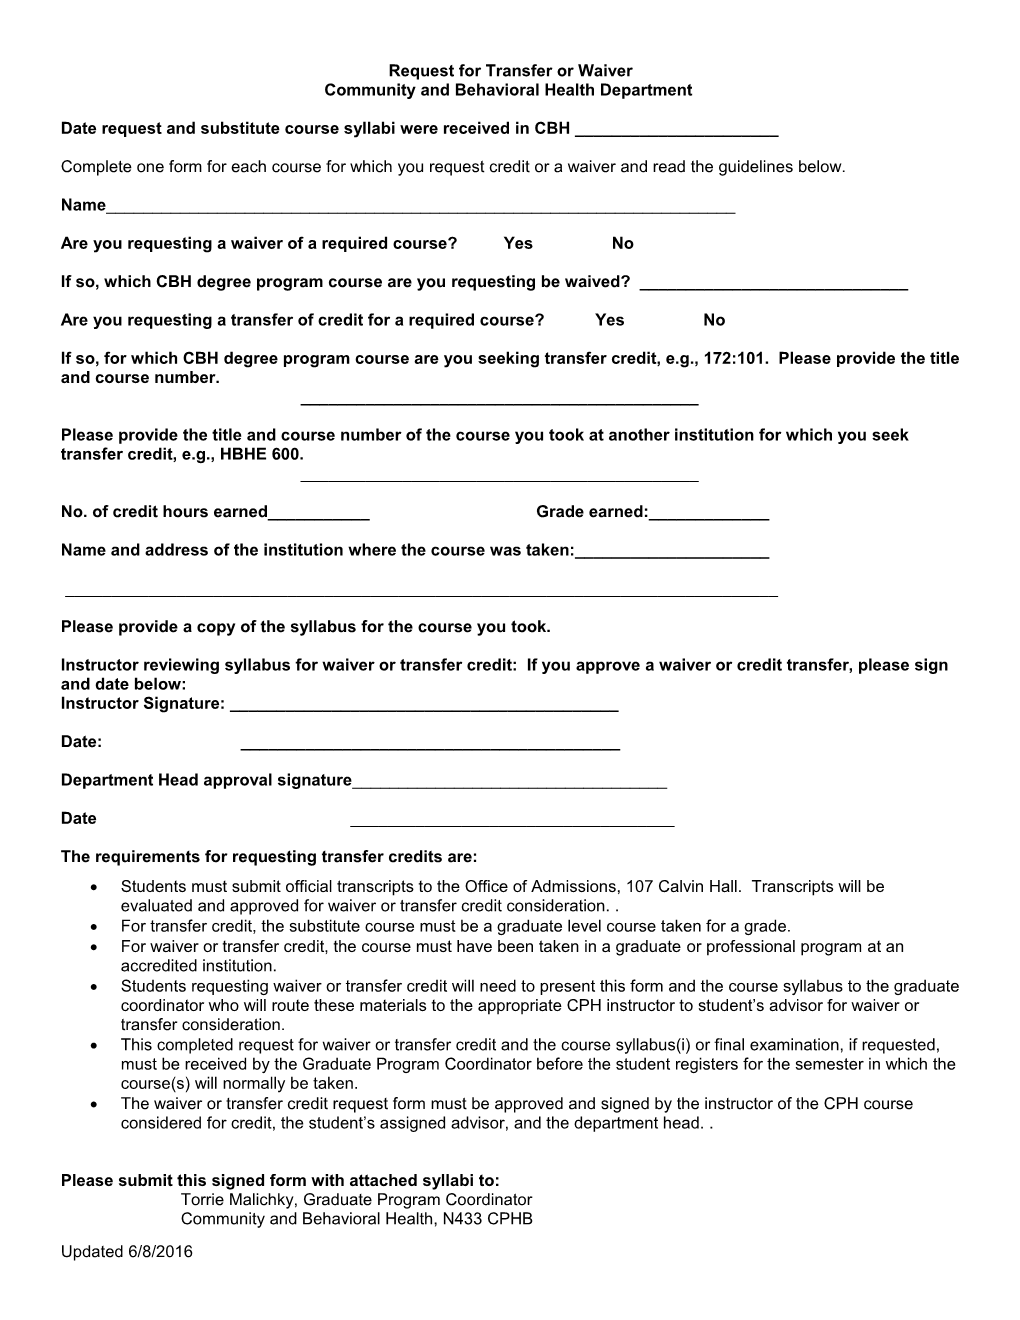 Request for Course Waiver Form